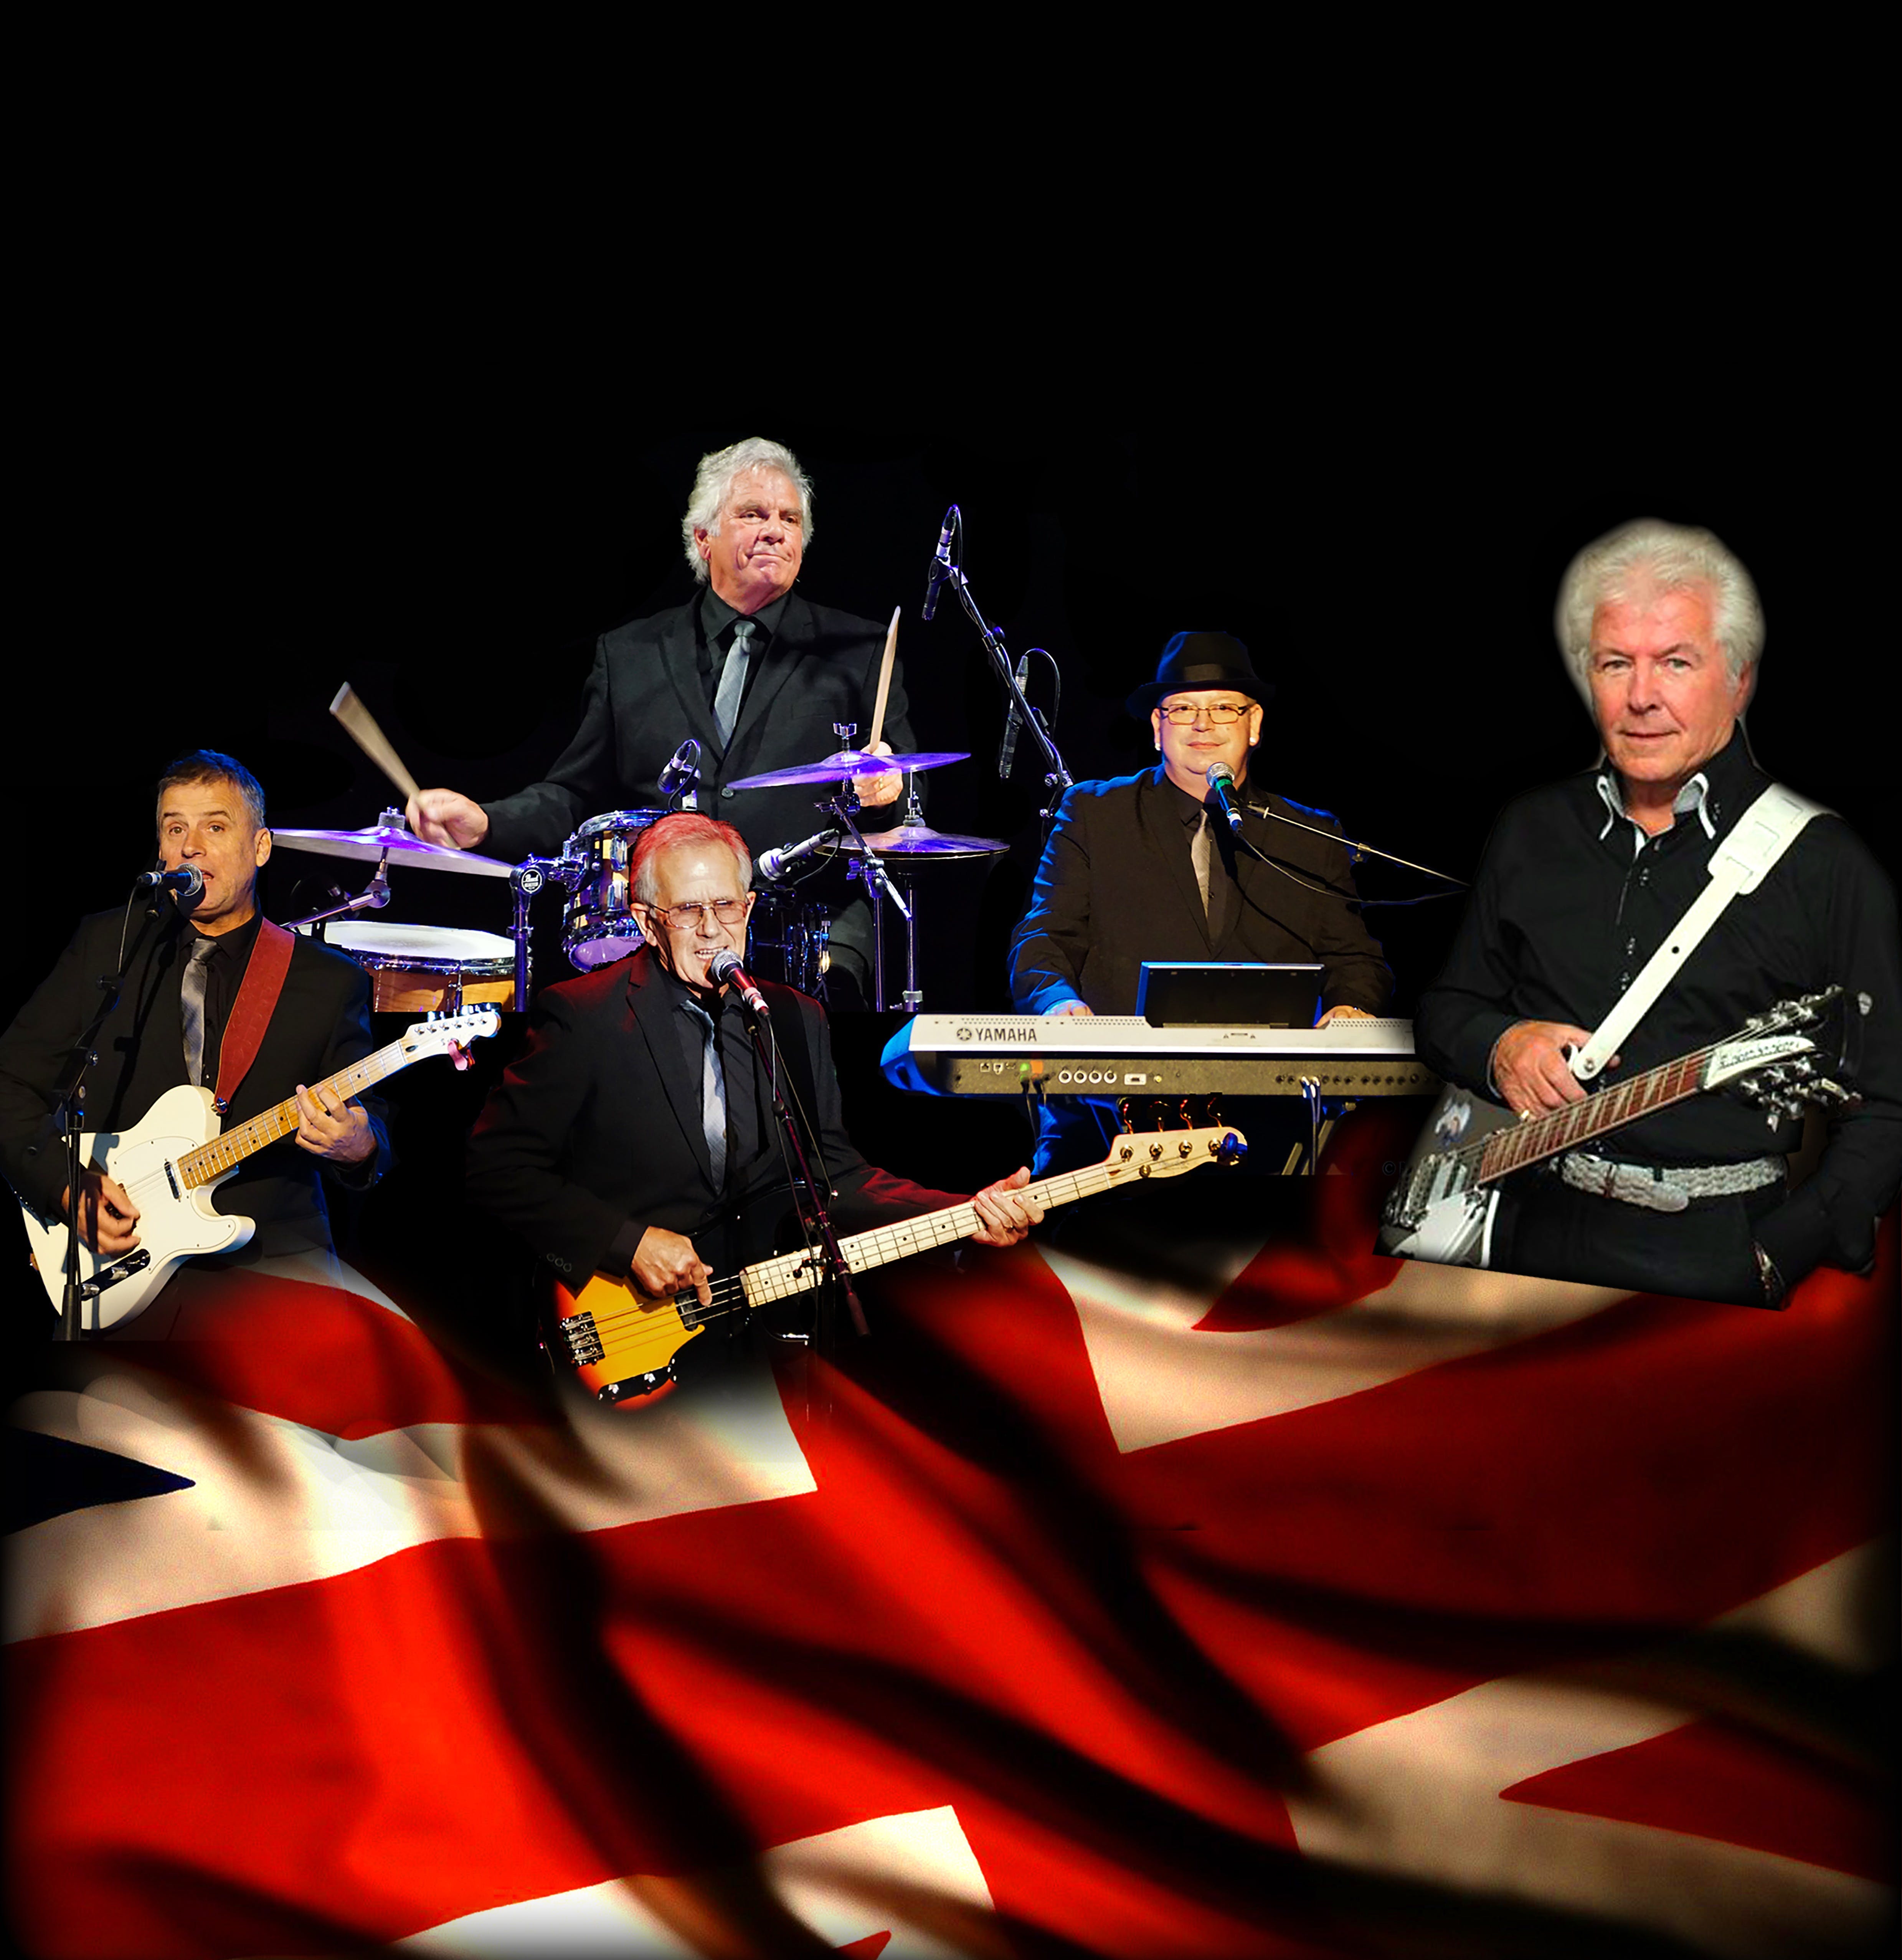 Herman's Hermits with Special Guest Mike Pender - The Six O'Clock Hop - Tourism Canberra